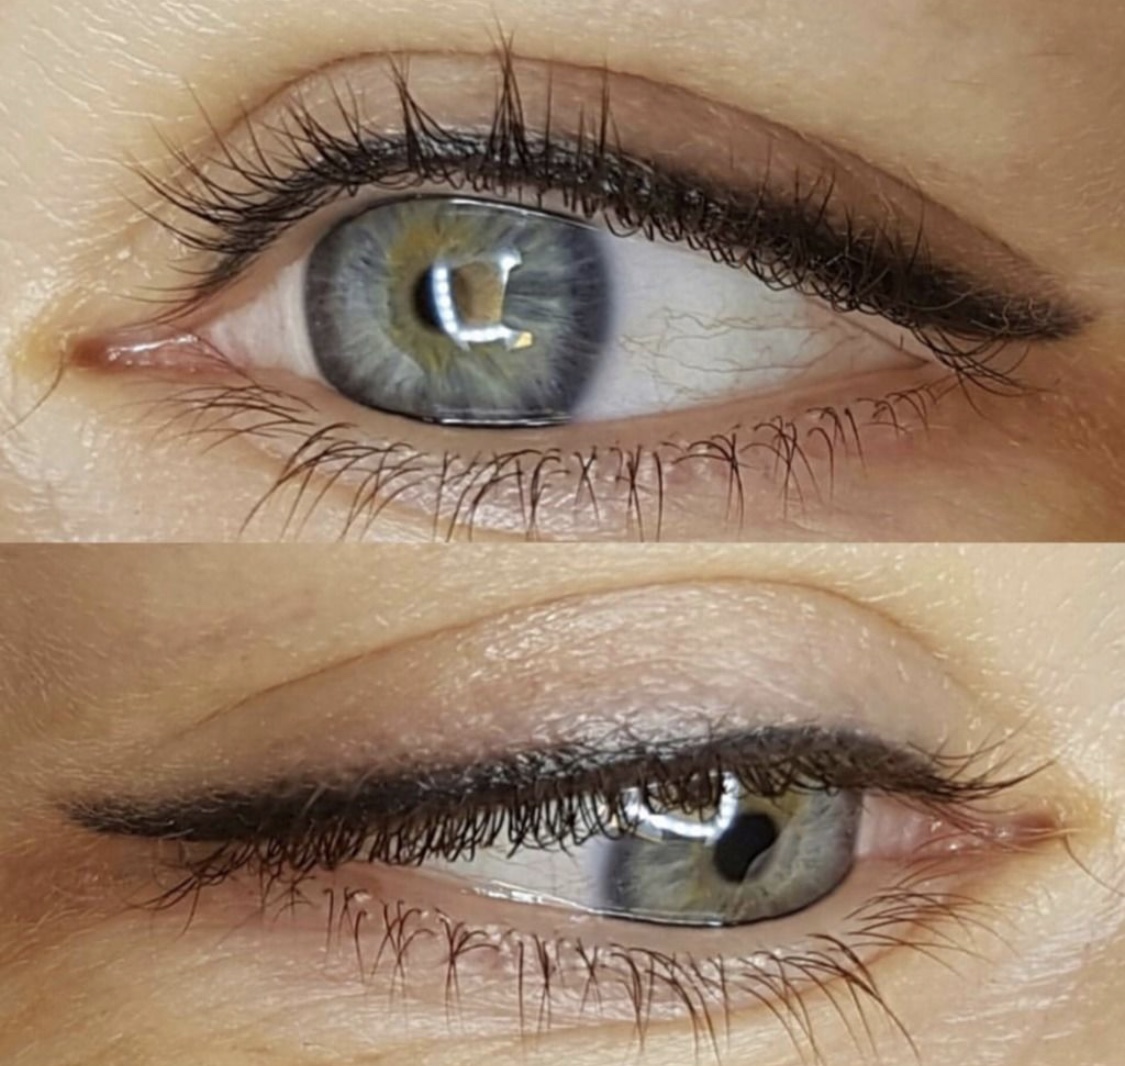 An eyeliner tattoo that you don't have to worry about ...